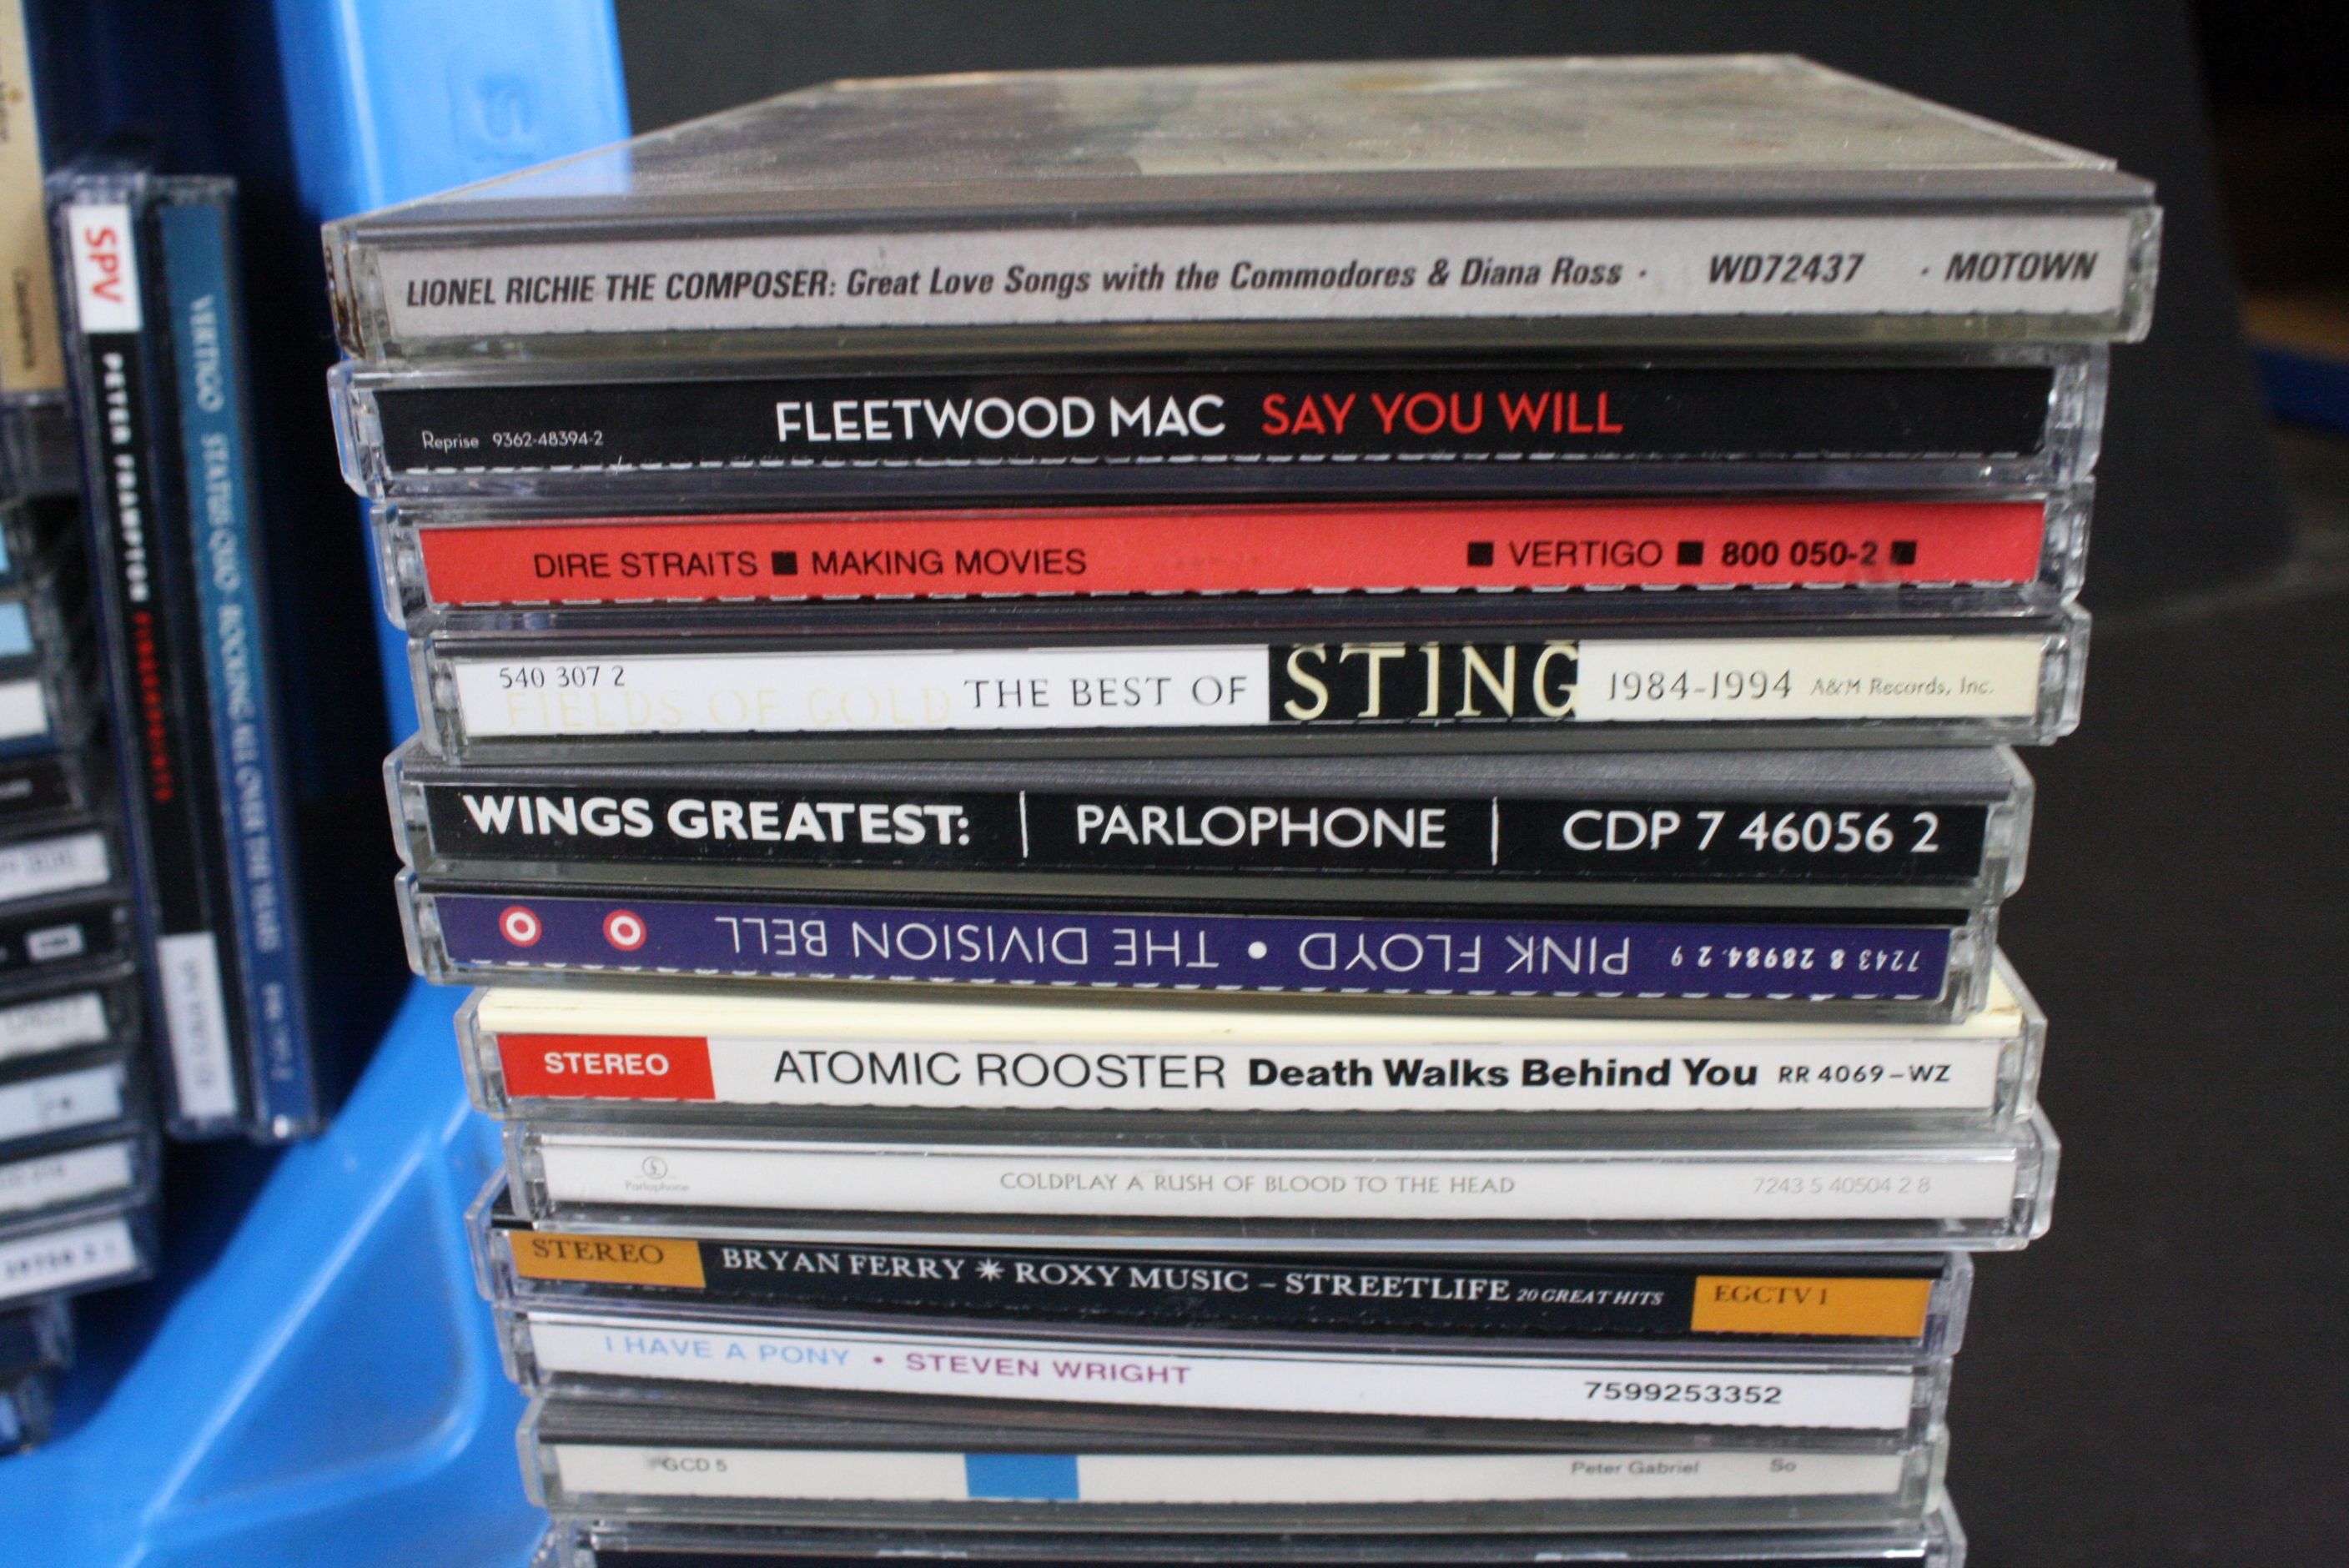 CDs / DVDs - Approx 100 CDs and 6 DVDs to include Dire Straits, Led Zeppelin (2 DVDs), Coldplay, - Image 9 of 10